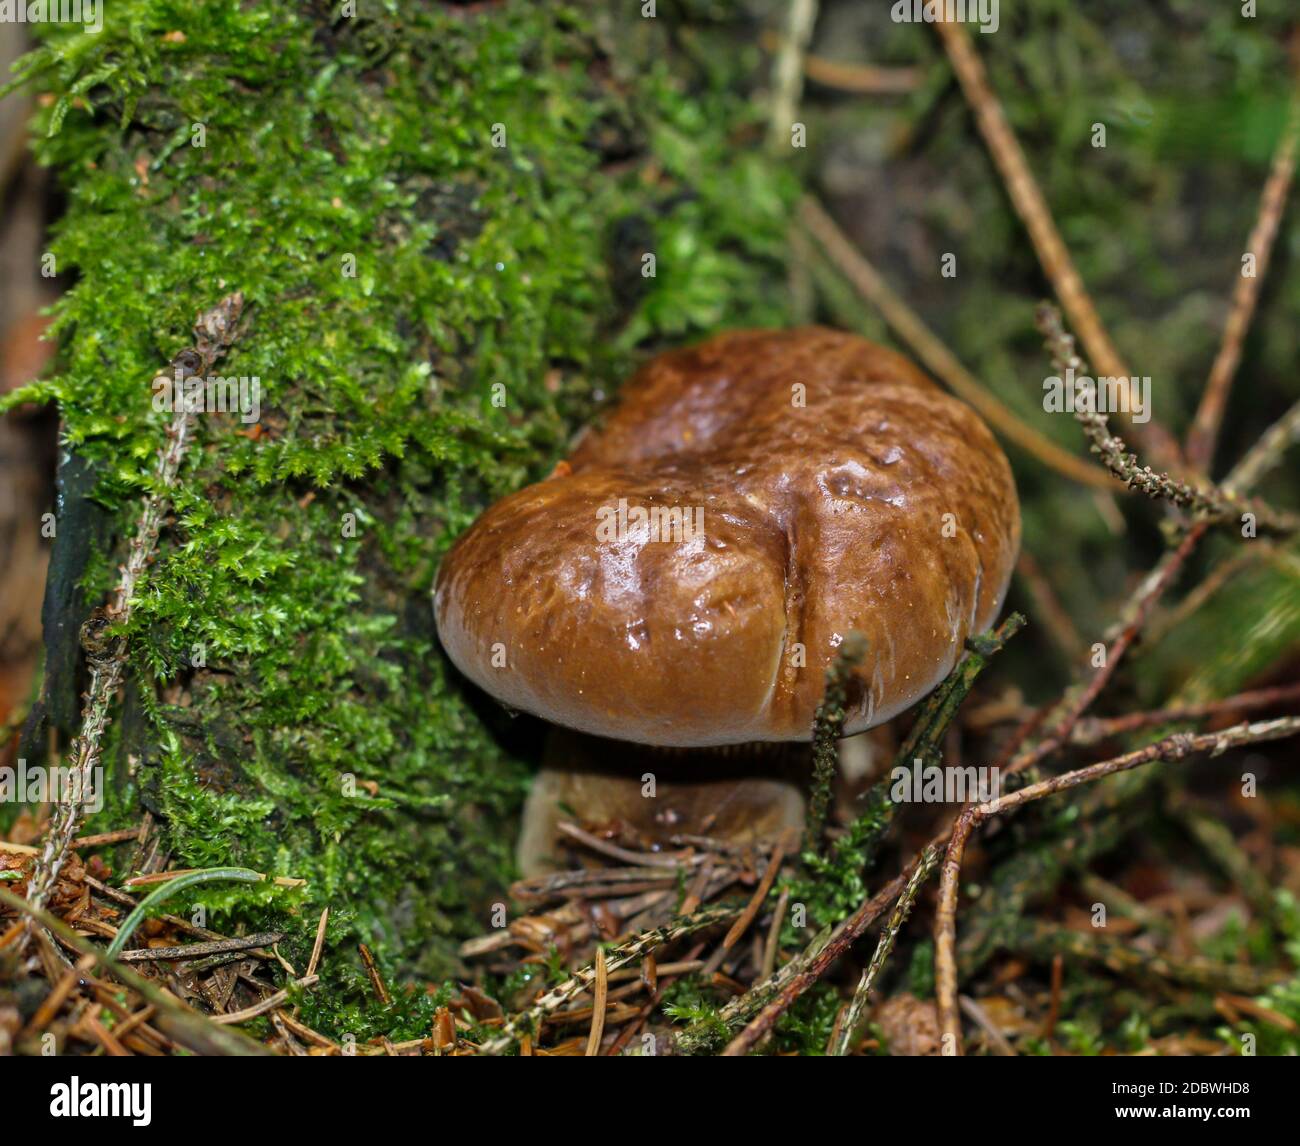 Close-up of a mushroom poking through the ground in the forest Stock Photo  - Alamy